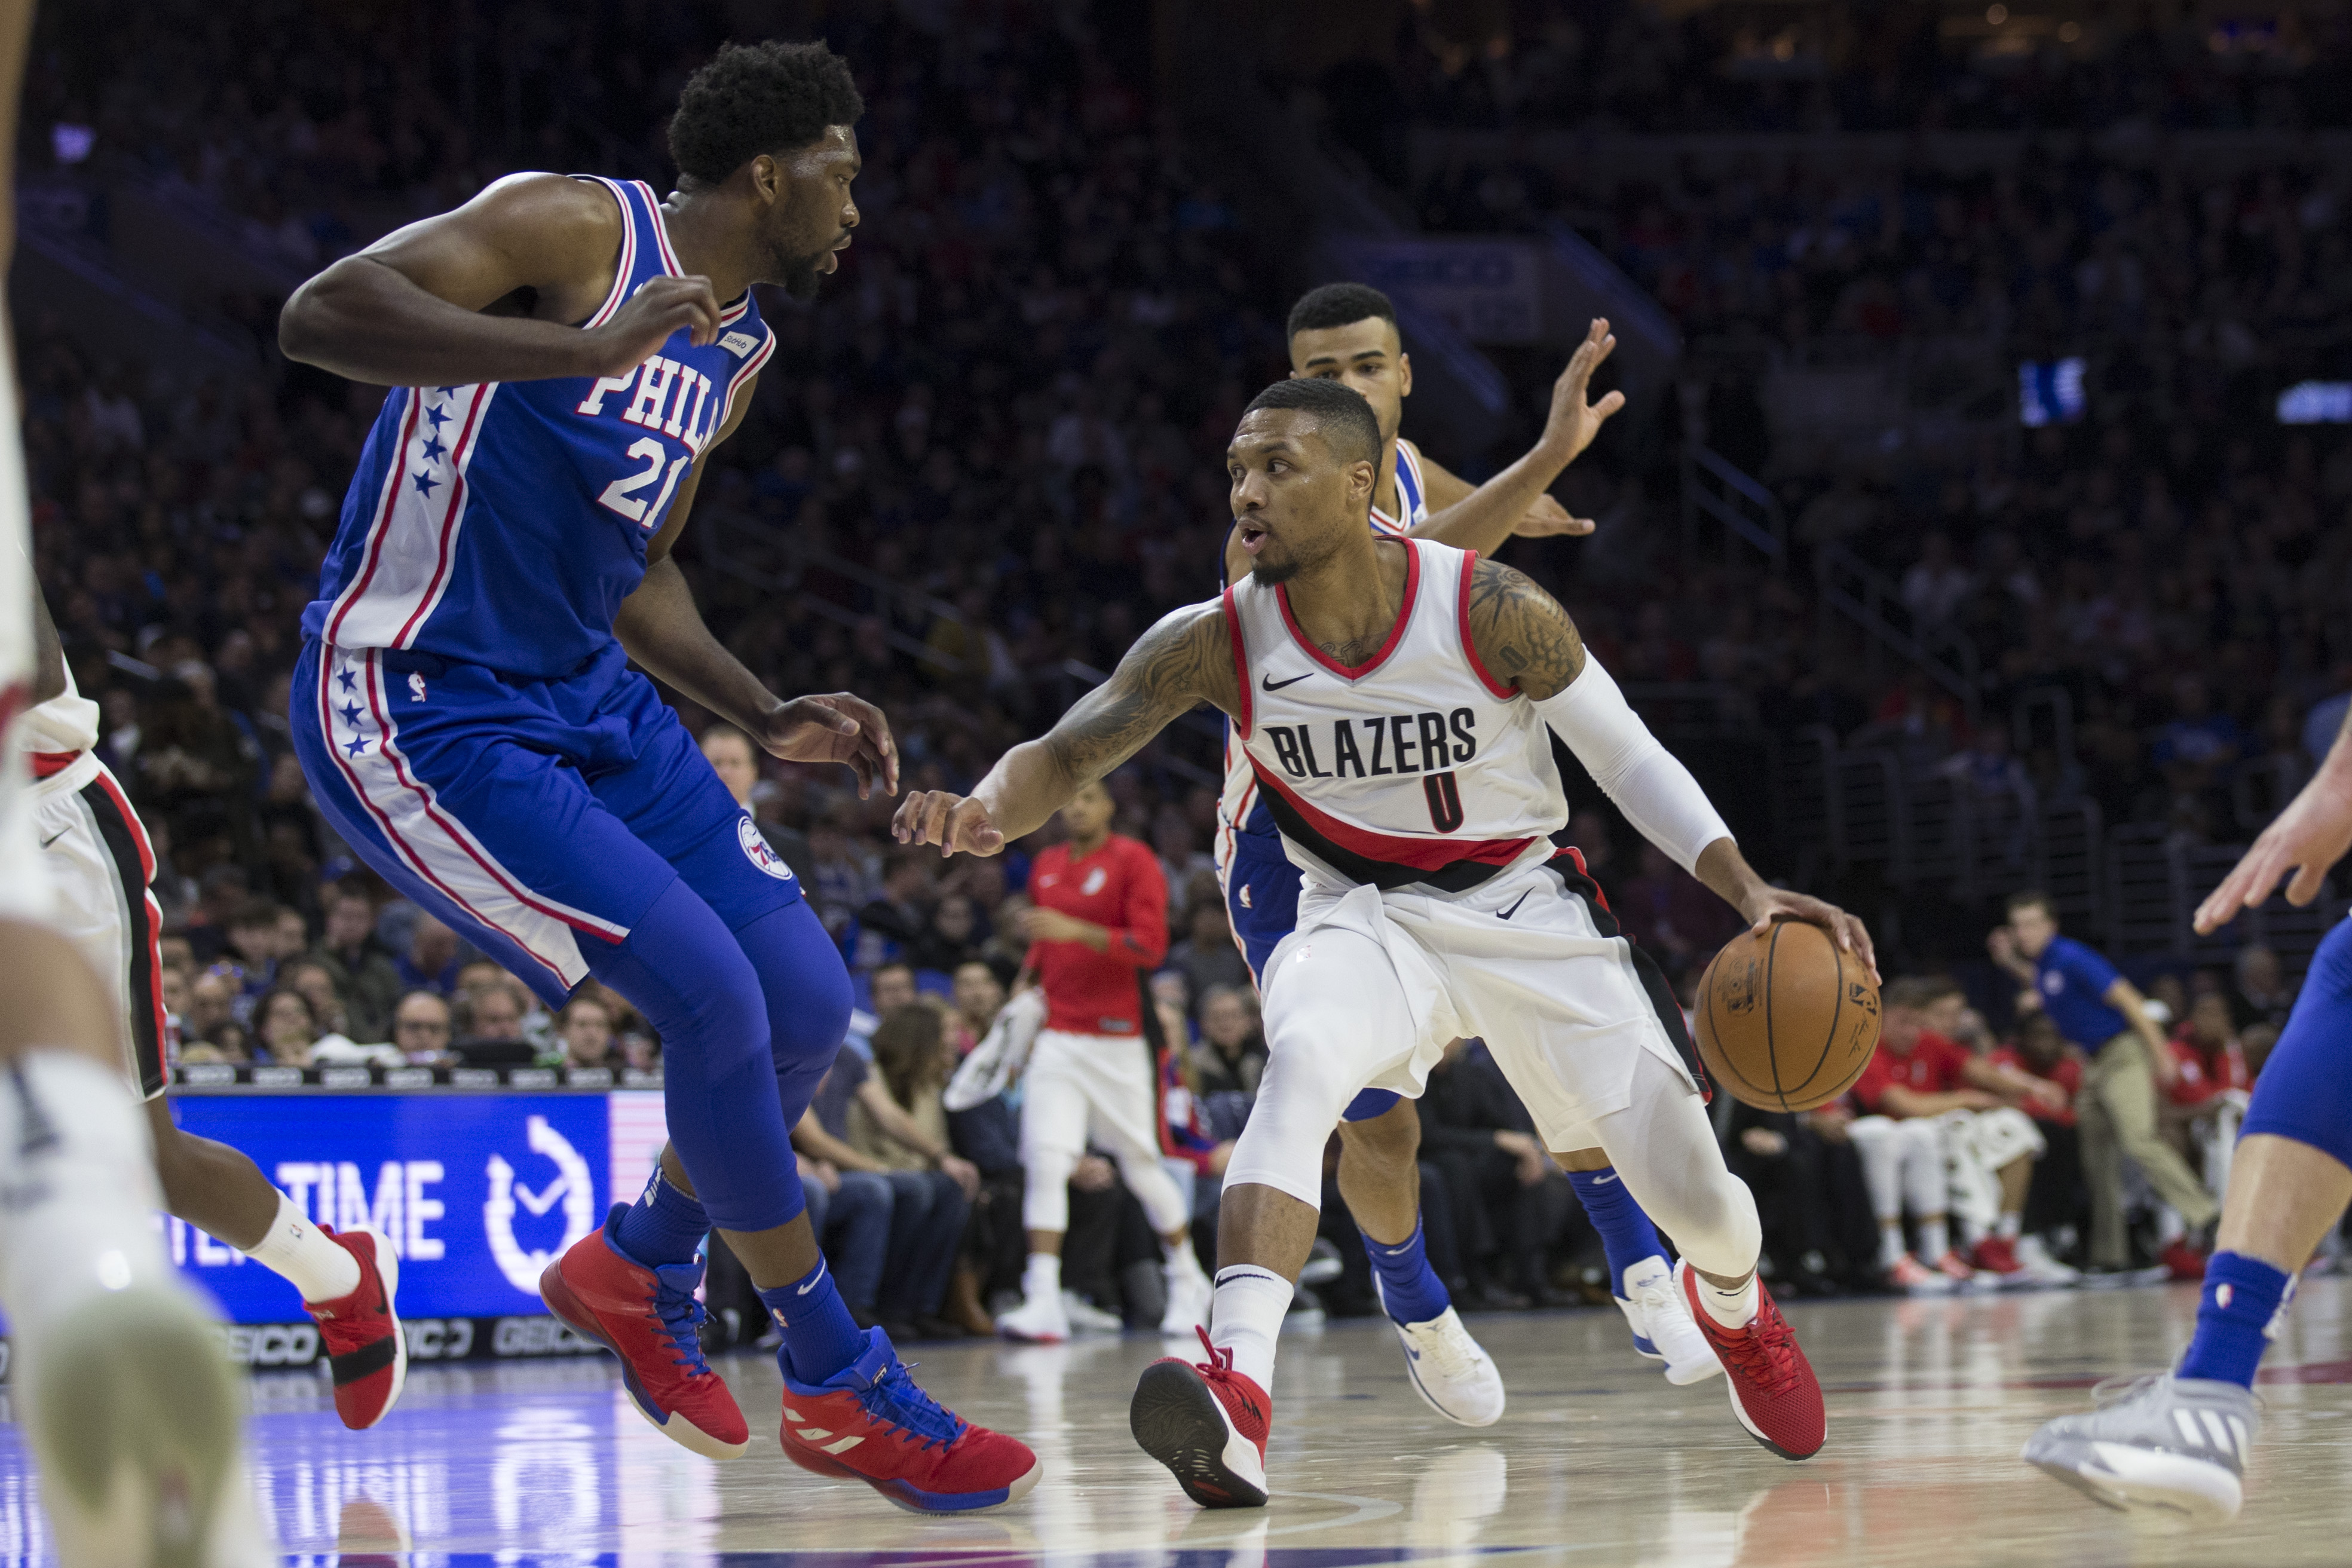 Damian Lillard goes off with 51 points to lead Blazers past Sixers